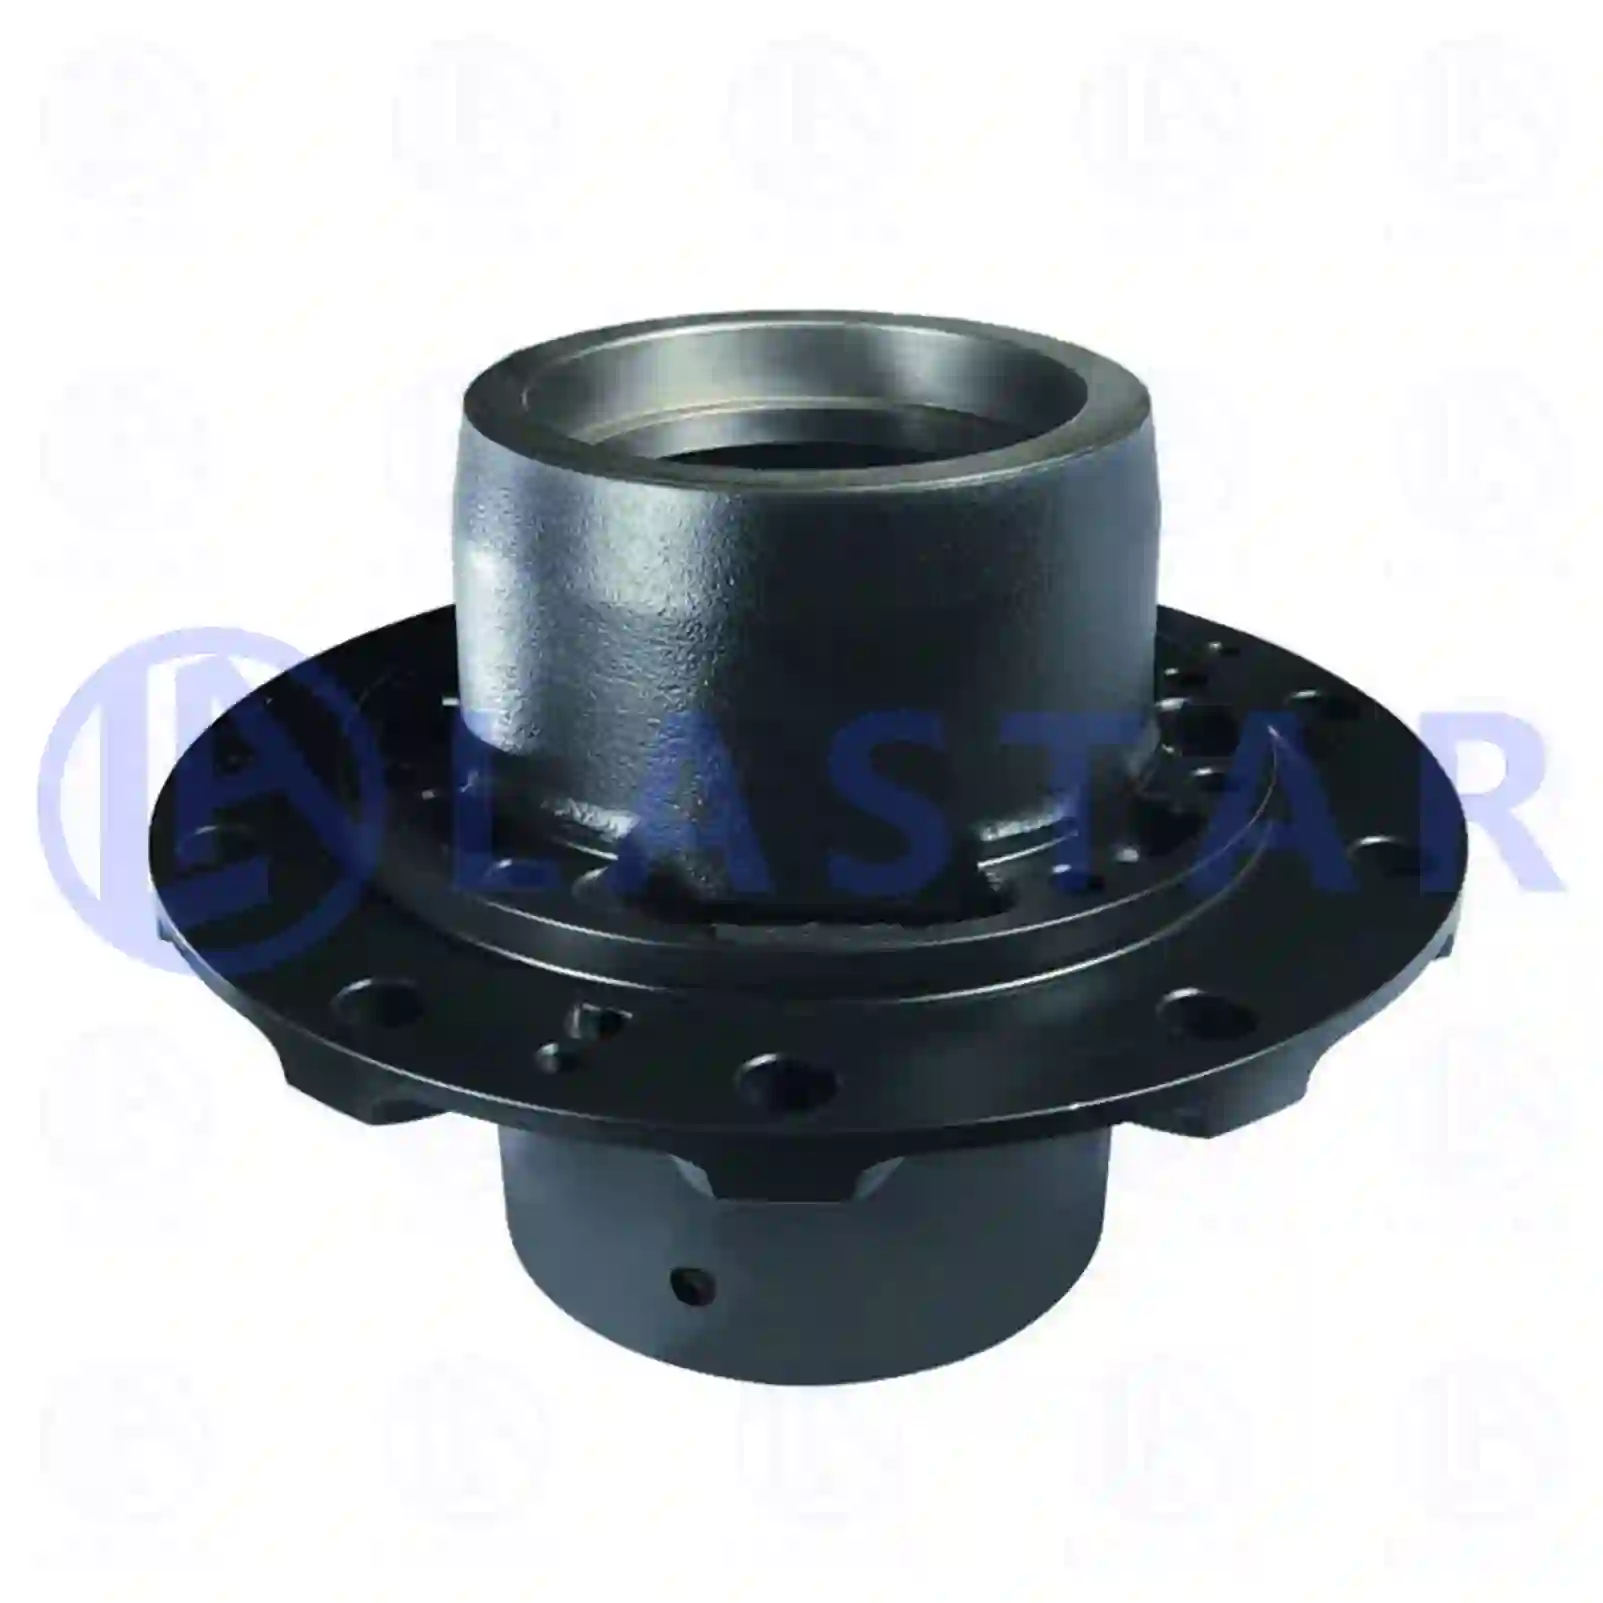 Wheel hub, without bearings, 77726340, 9423560001, 9423560801, , , , ||  77726340 Lastar Spare Part | Truck Spare Parts, Auotomotive Spare Parts Wheel hub, without bearings, 77726340, 9423560001, 9423560801, , , , ||  77726340 Lastar Spare Part | Truck Spare Parts, Auotomotive Spare Parts